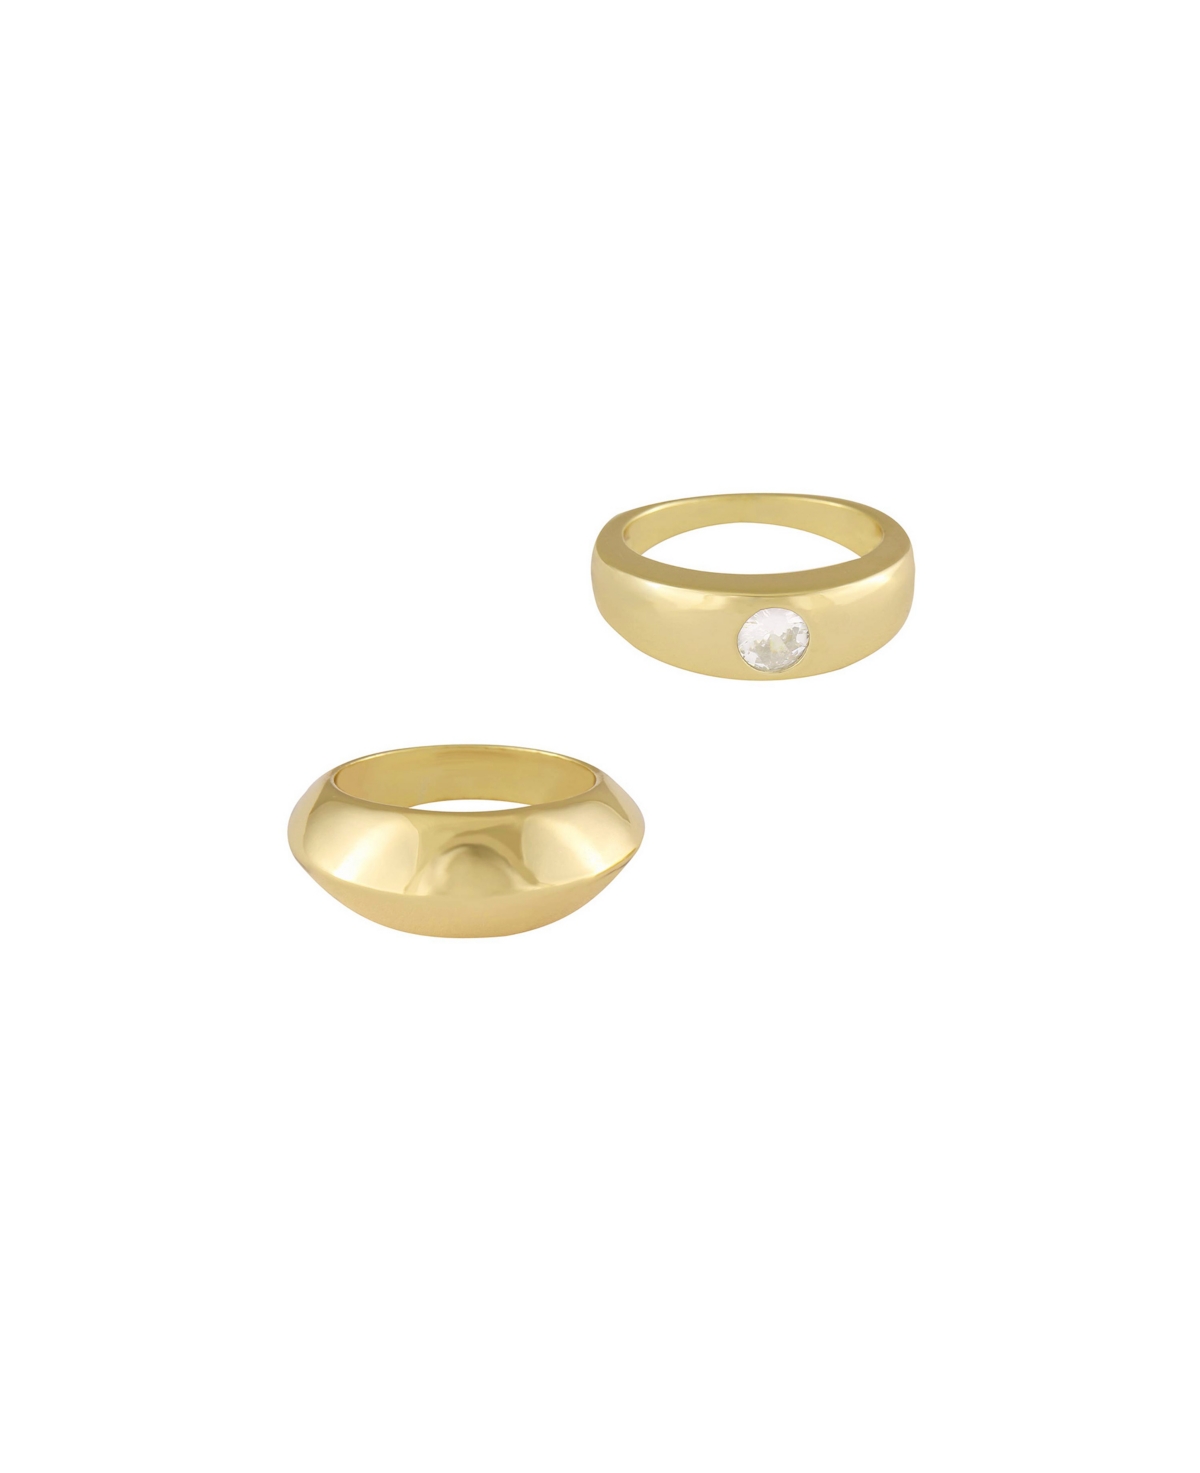 Women's 18k Gold Plated Statement Band Ring Set - Gold